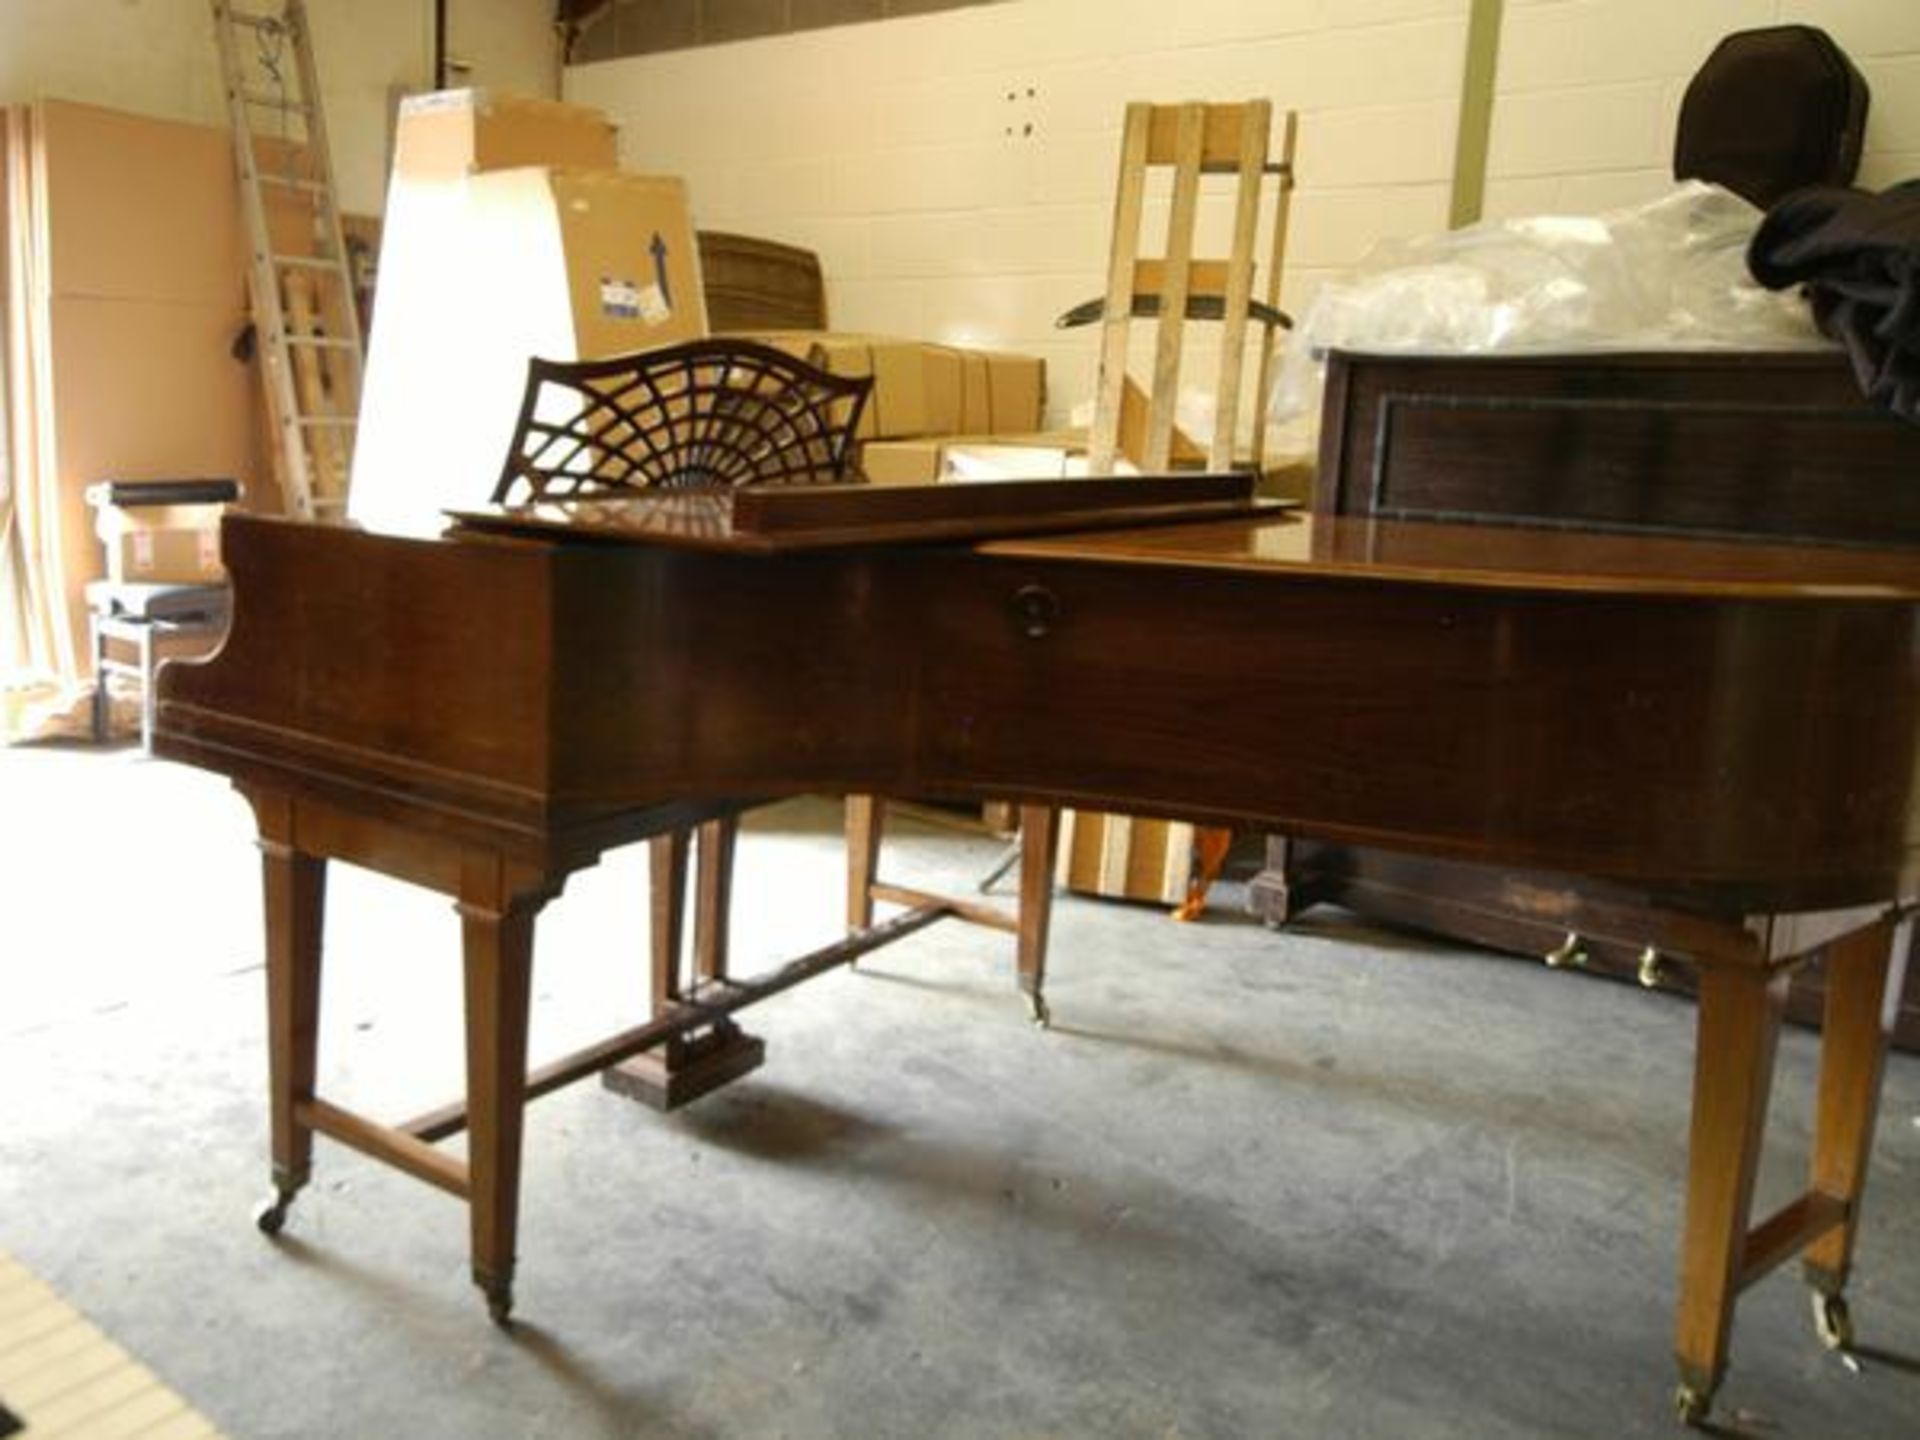 Bechstein Model ‘C’ Grand Piano, Circa 1914, Mahogany Veneer May Require Attention (currently - Image 4 of 7